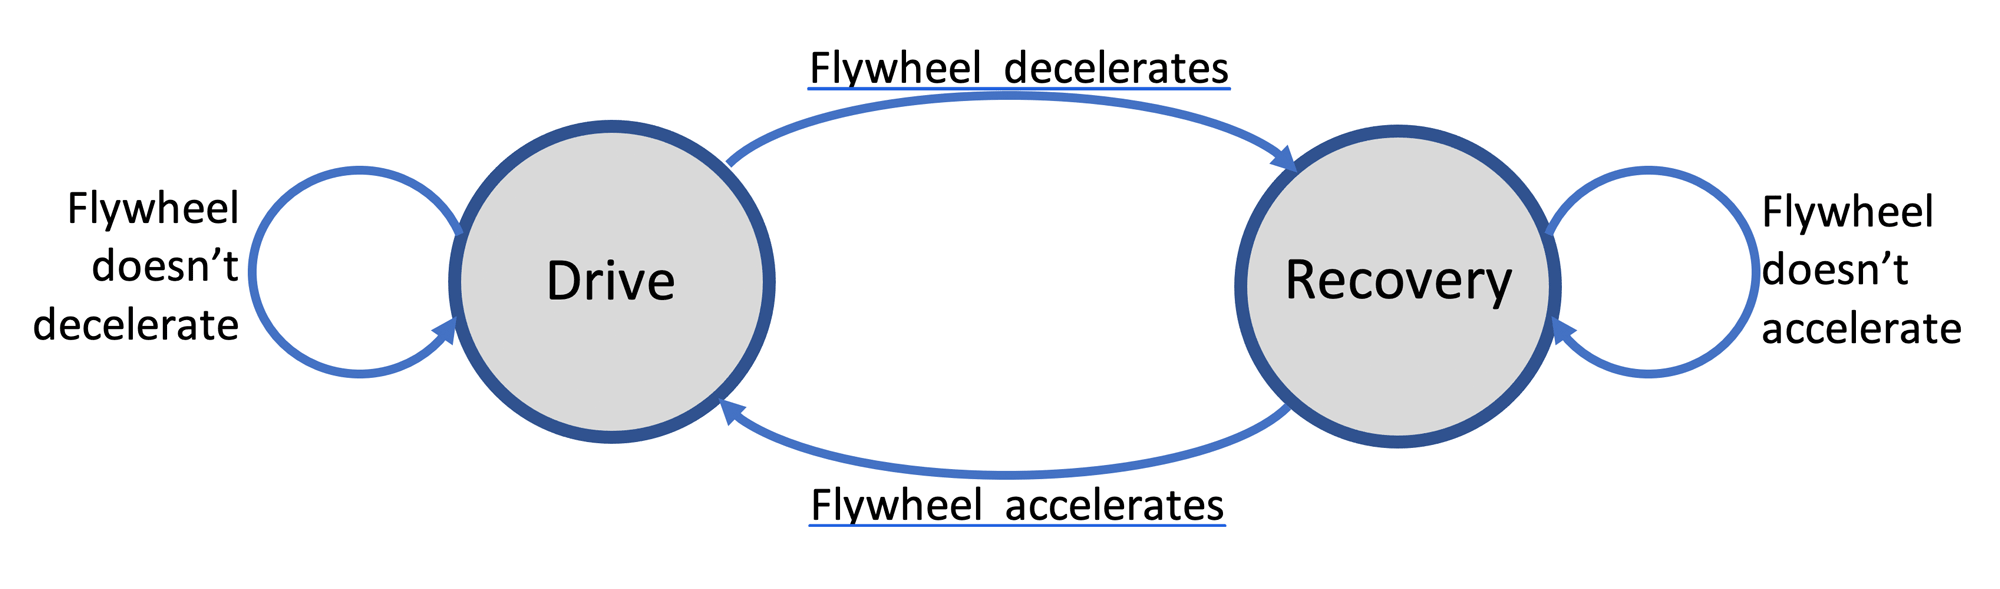 Finite state machine of rowing cycle